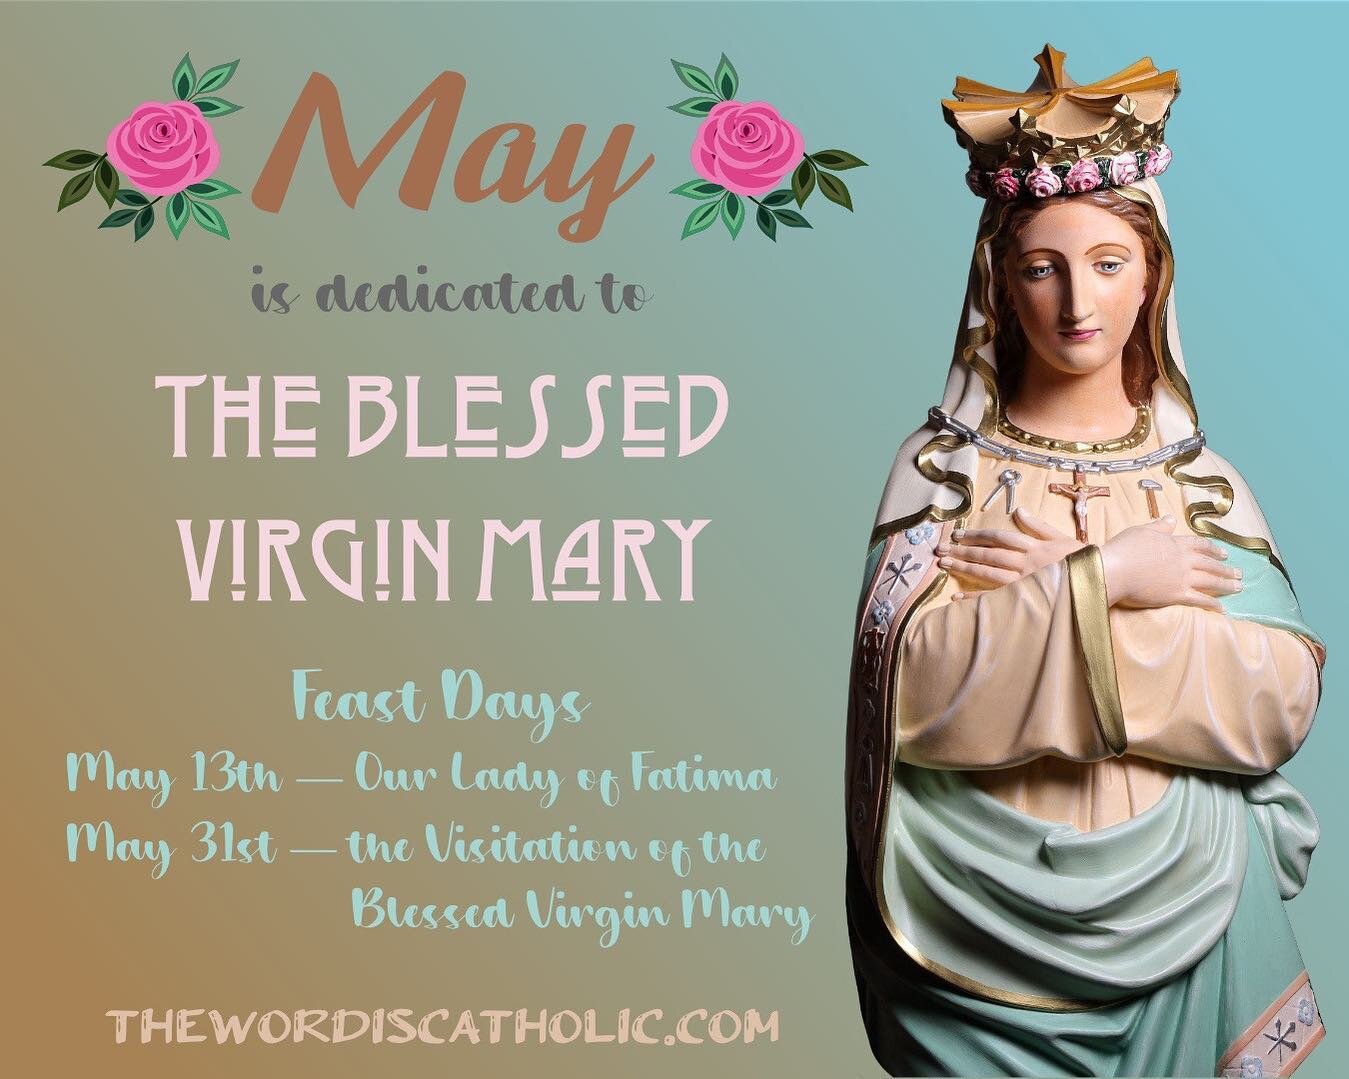 May is devoted to the Blessed Virgin Mary, Mother of God and Mother of the Church. How fitting that we should honor all mothers this month as well.
.
A prayer from the Diary of St. Faustina:
.
O Mary, my Mother and my Lady, I offer You my soul, my bo